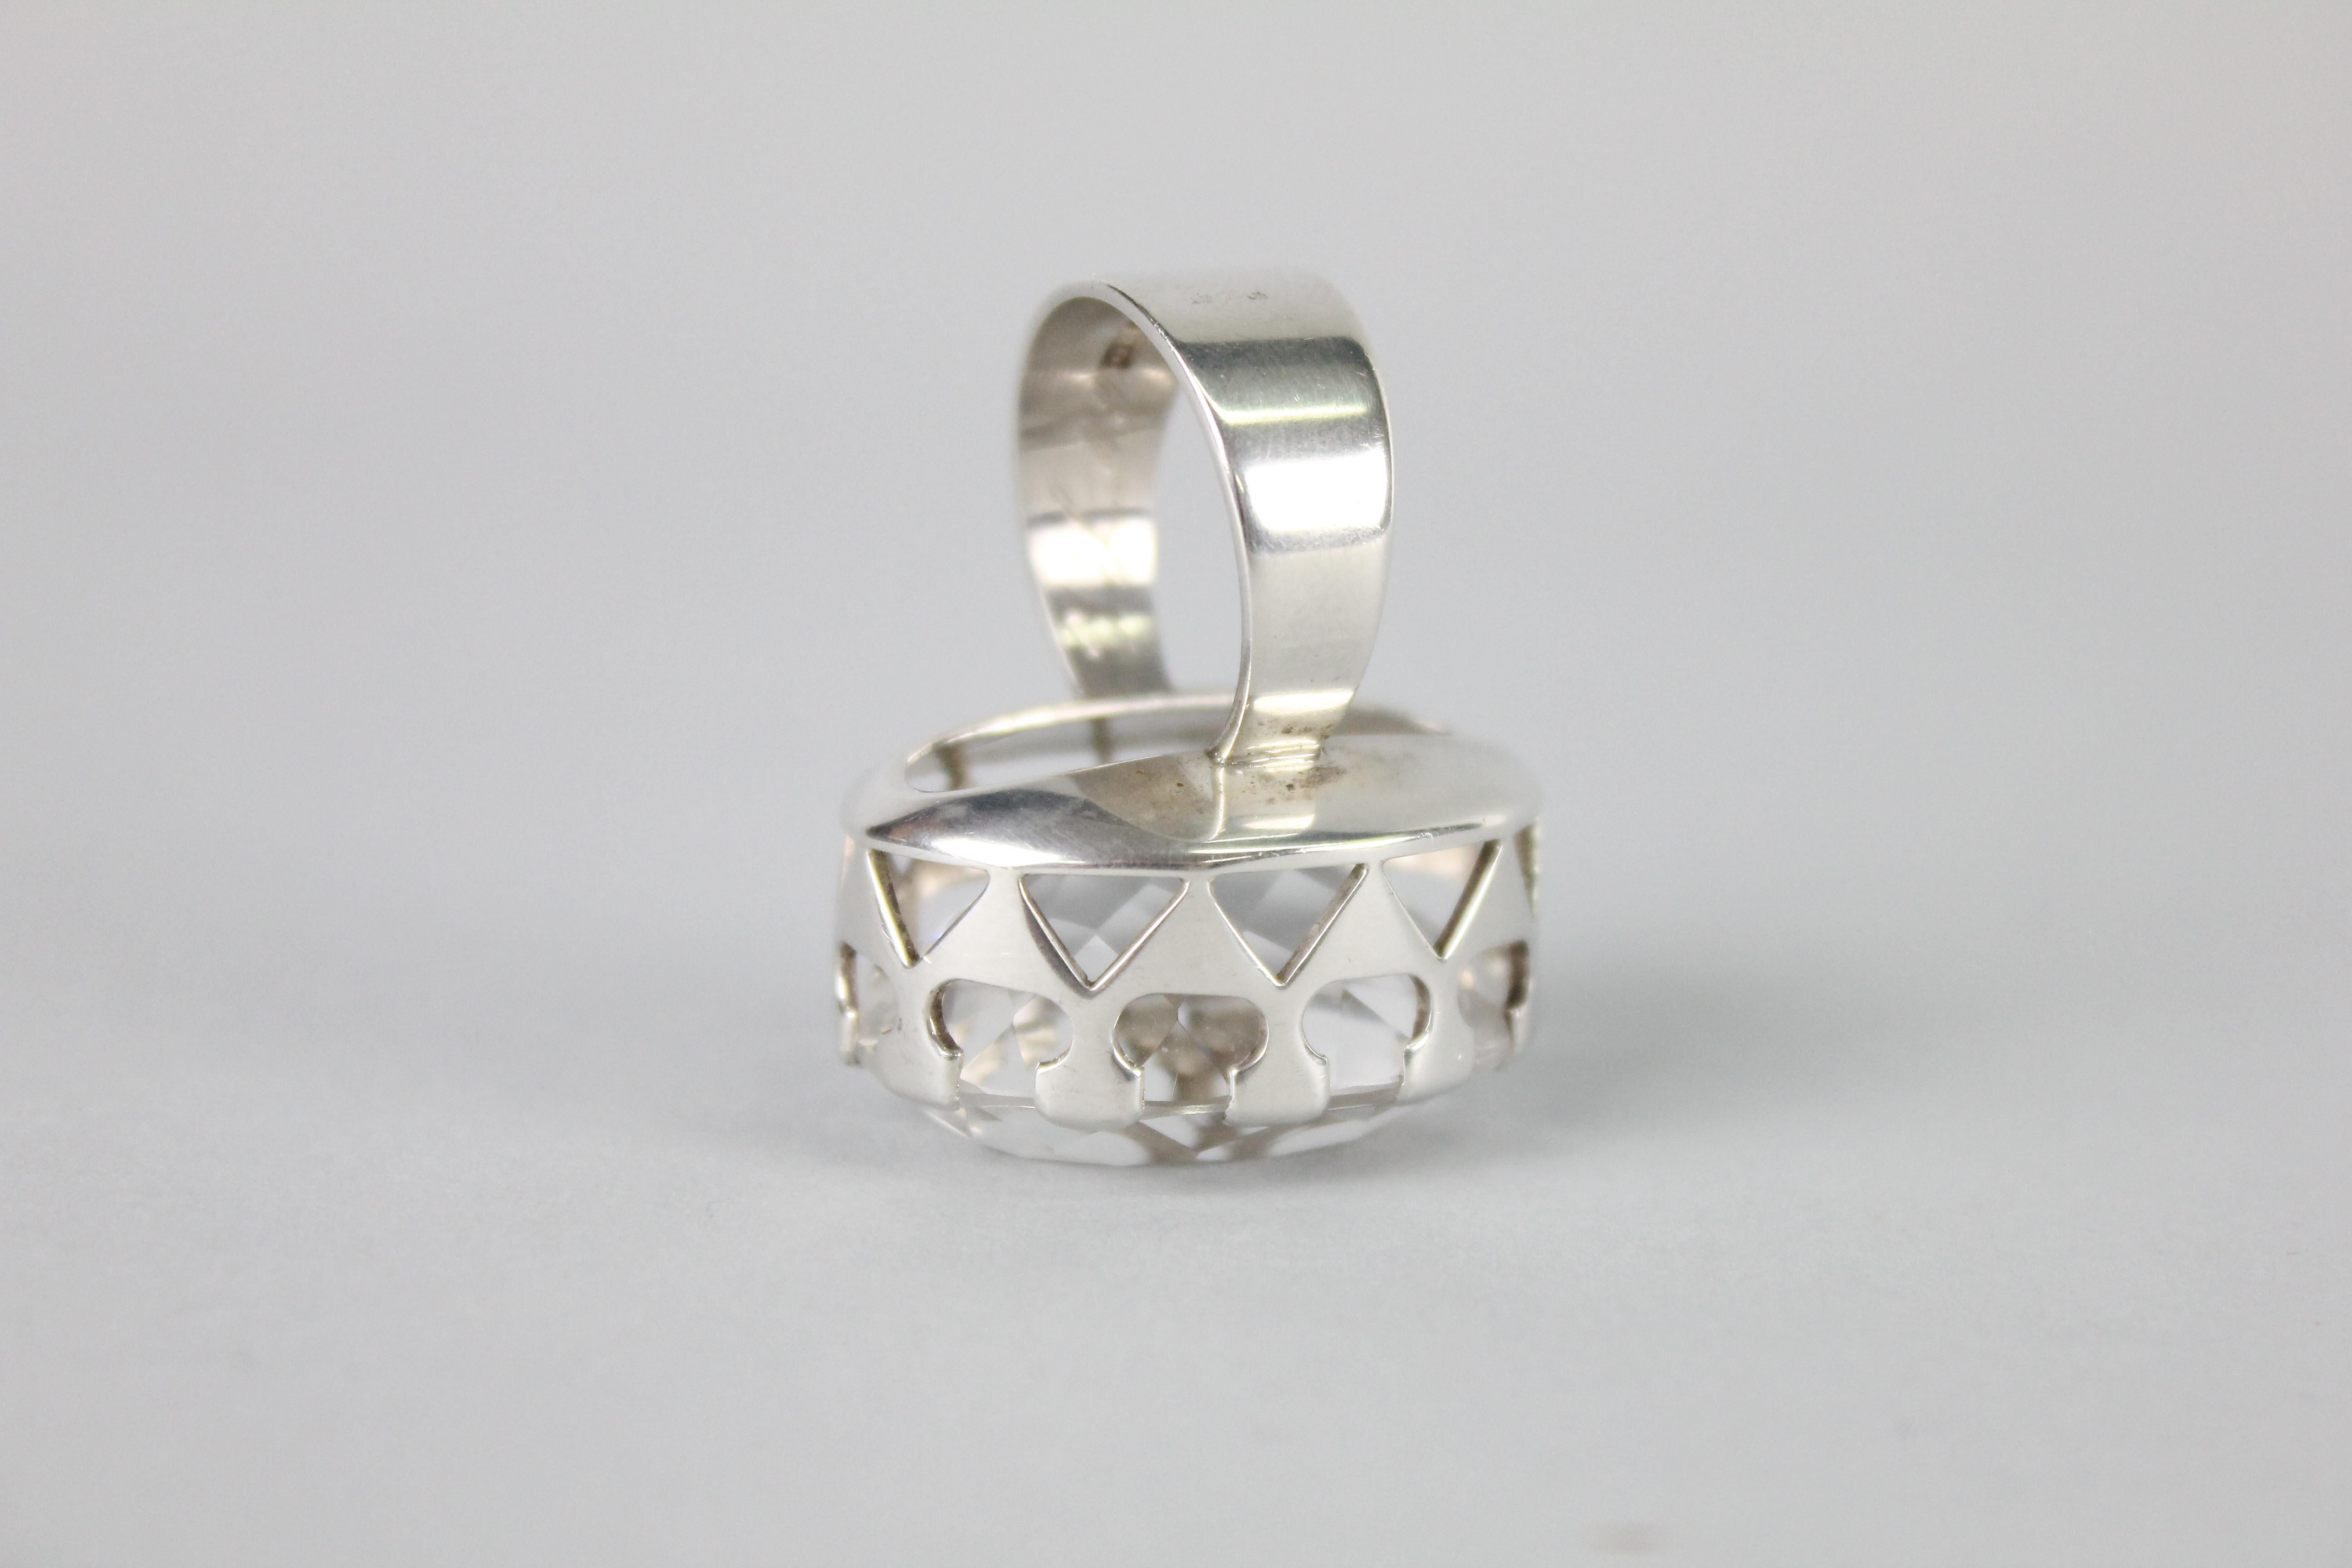 Modernist Ring in Silver and a Large Rock Crystal by Kaplan, Stockholm, 1968 For Sale 1